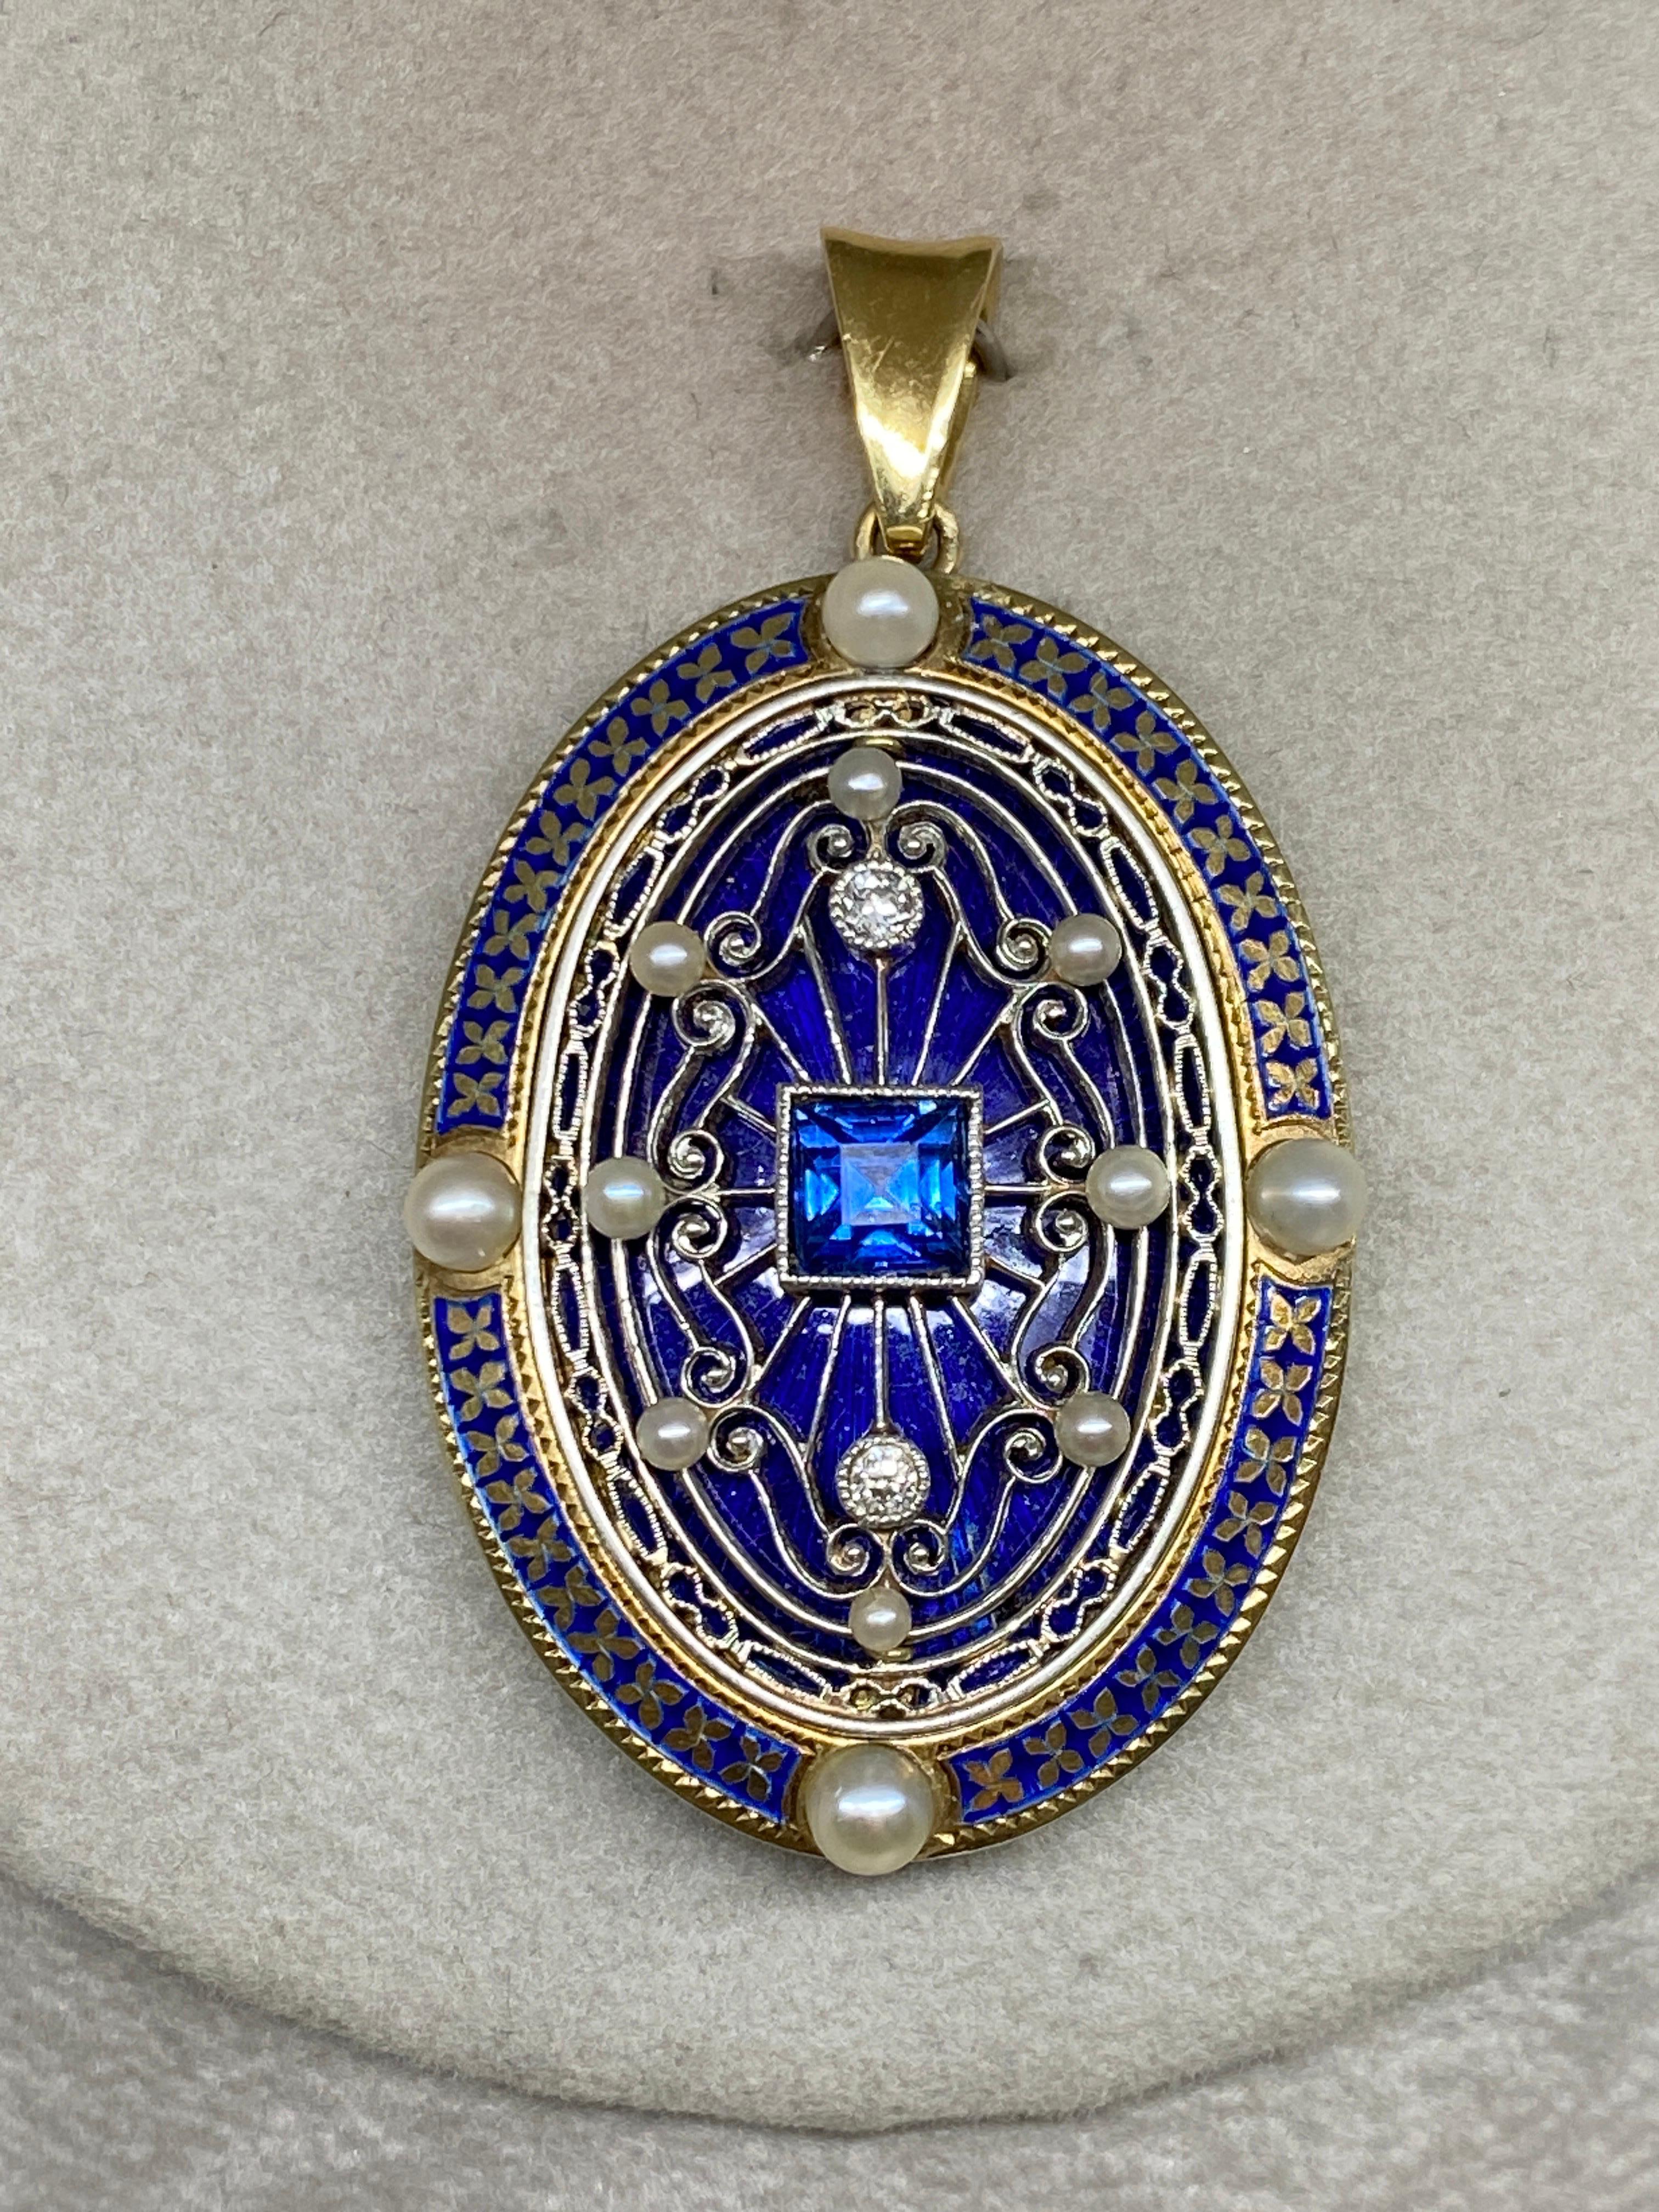 This stunning 14k yellow gold piece circa early 1900's was originally a brooch and at some point during it's past was elegantly converted into an alluring pendant.

At the center of a glossy ultramarine blue enameled oval yellow gold plaque sits a